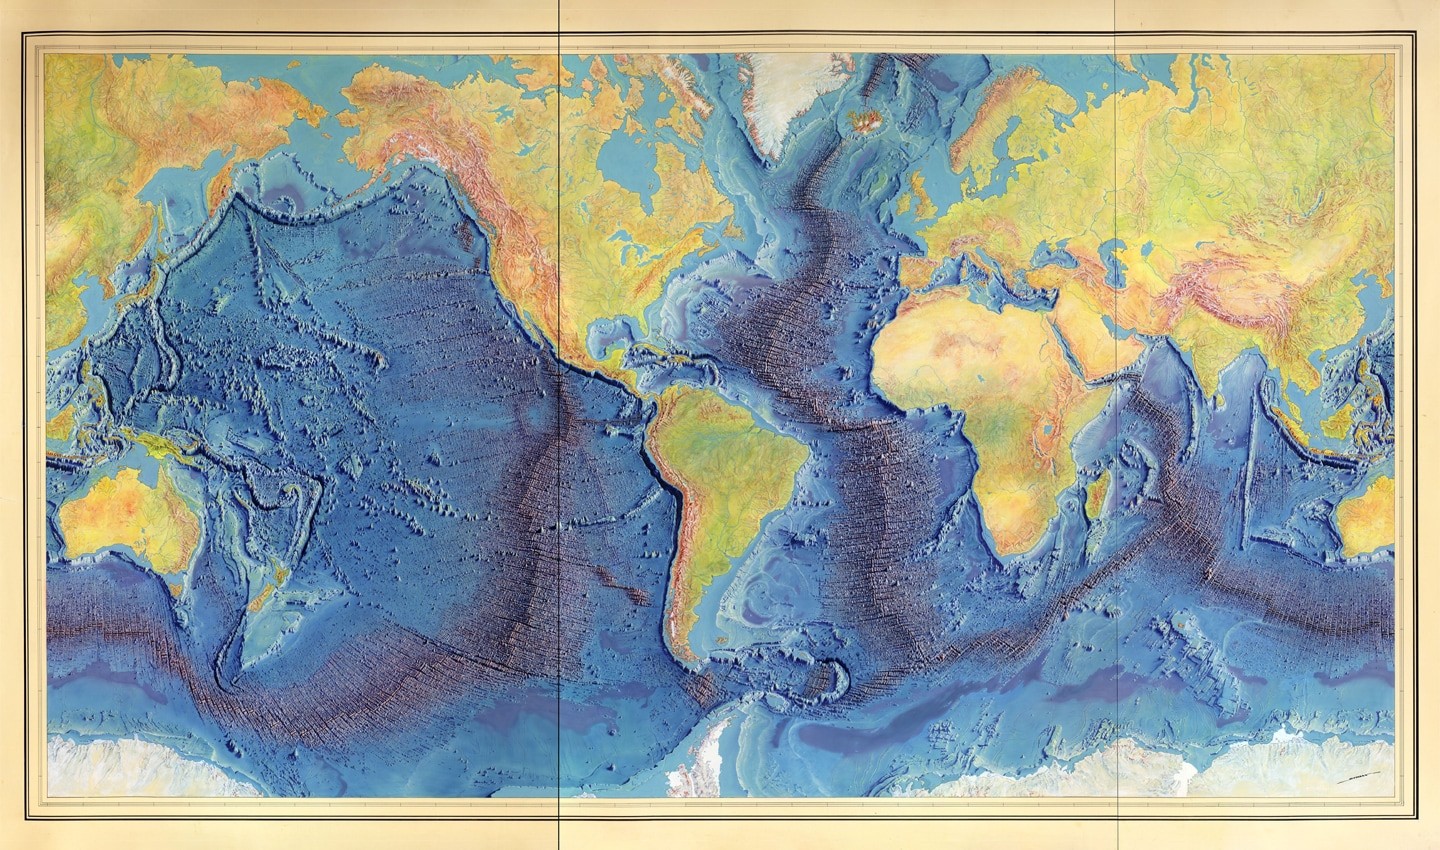 Tharp’s discovery of a mid-ocean rift was invaluable to research about plate tectonics.